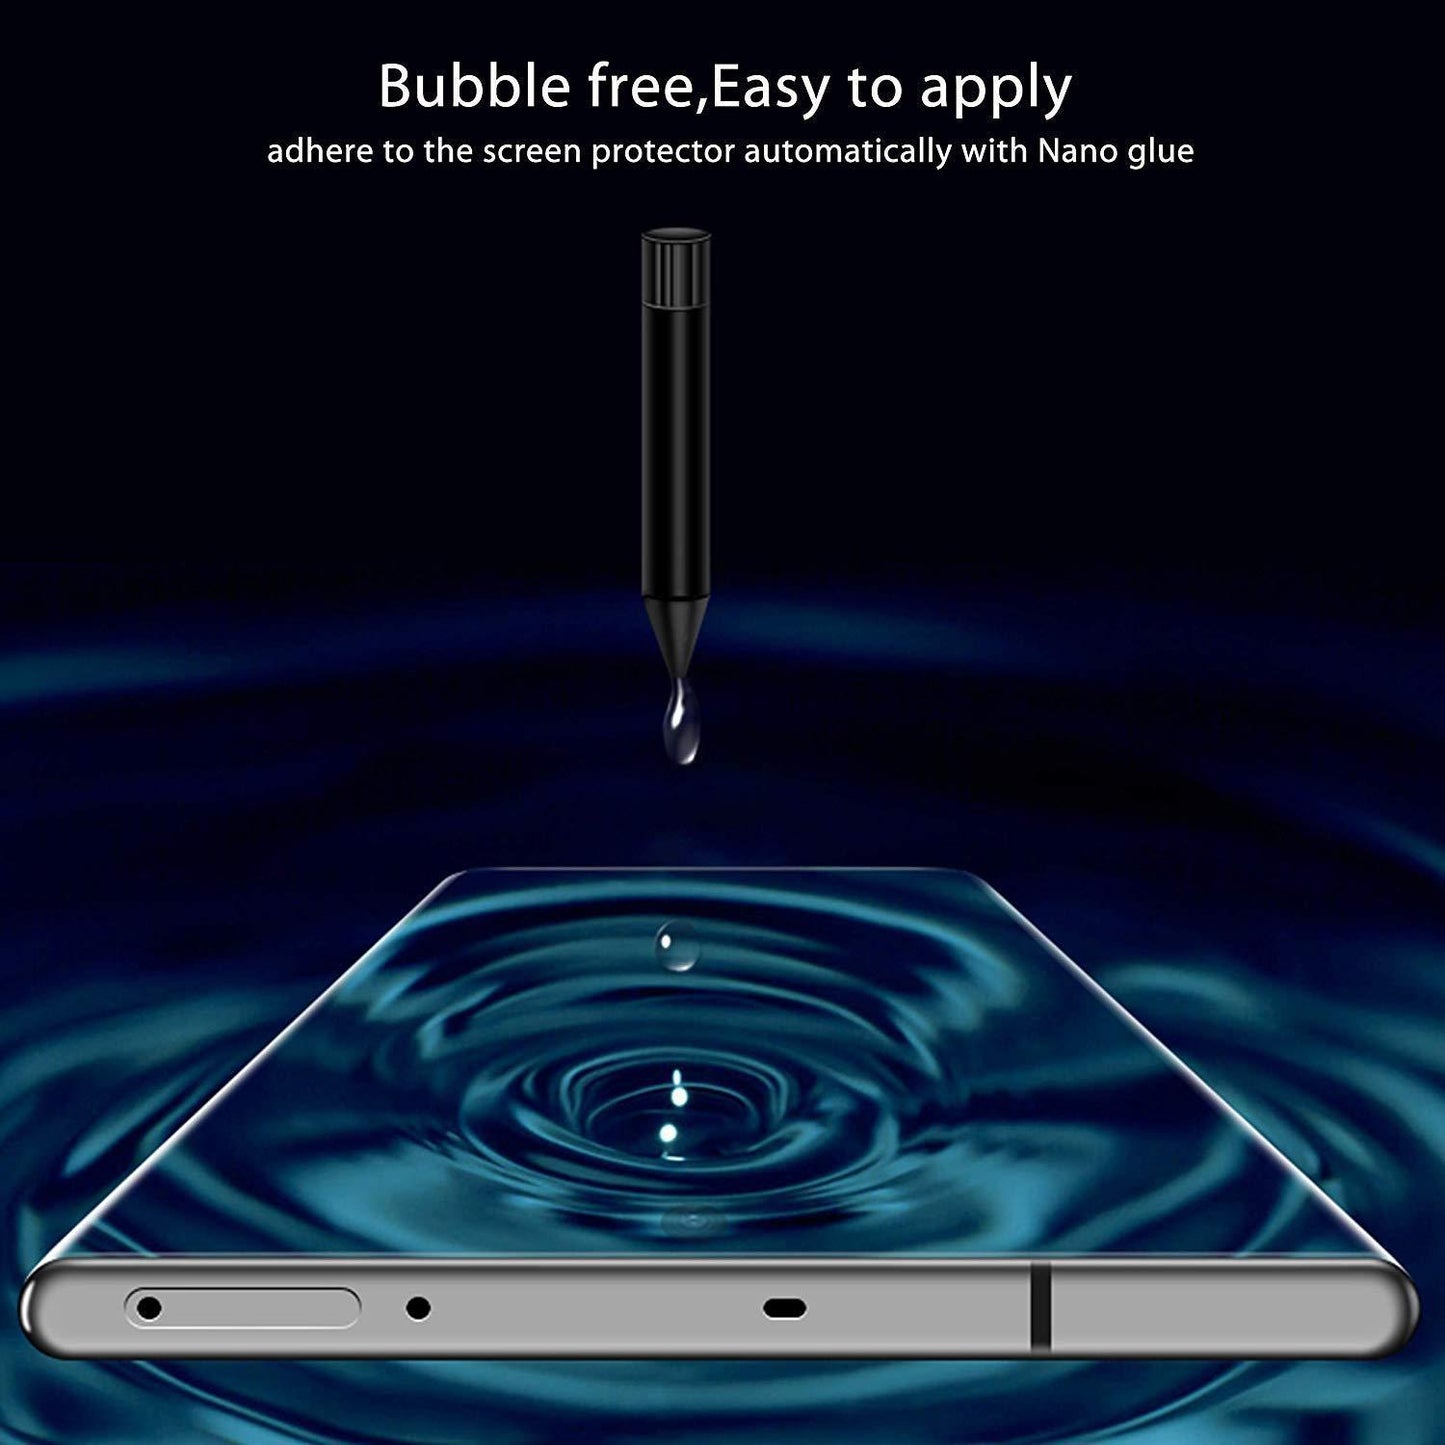 Galaxy Note 10 Plus Full Coverage Curved Tempered Glass